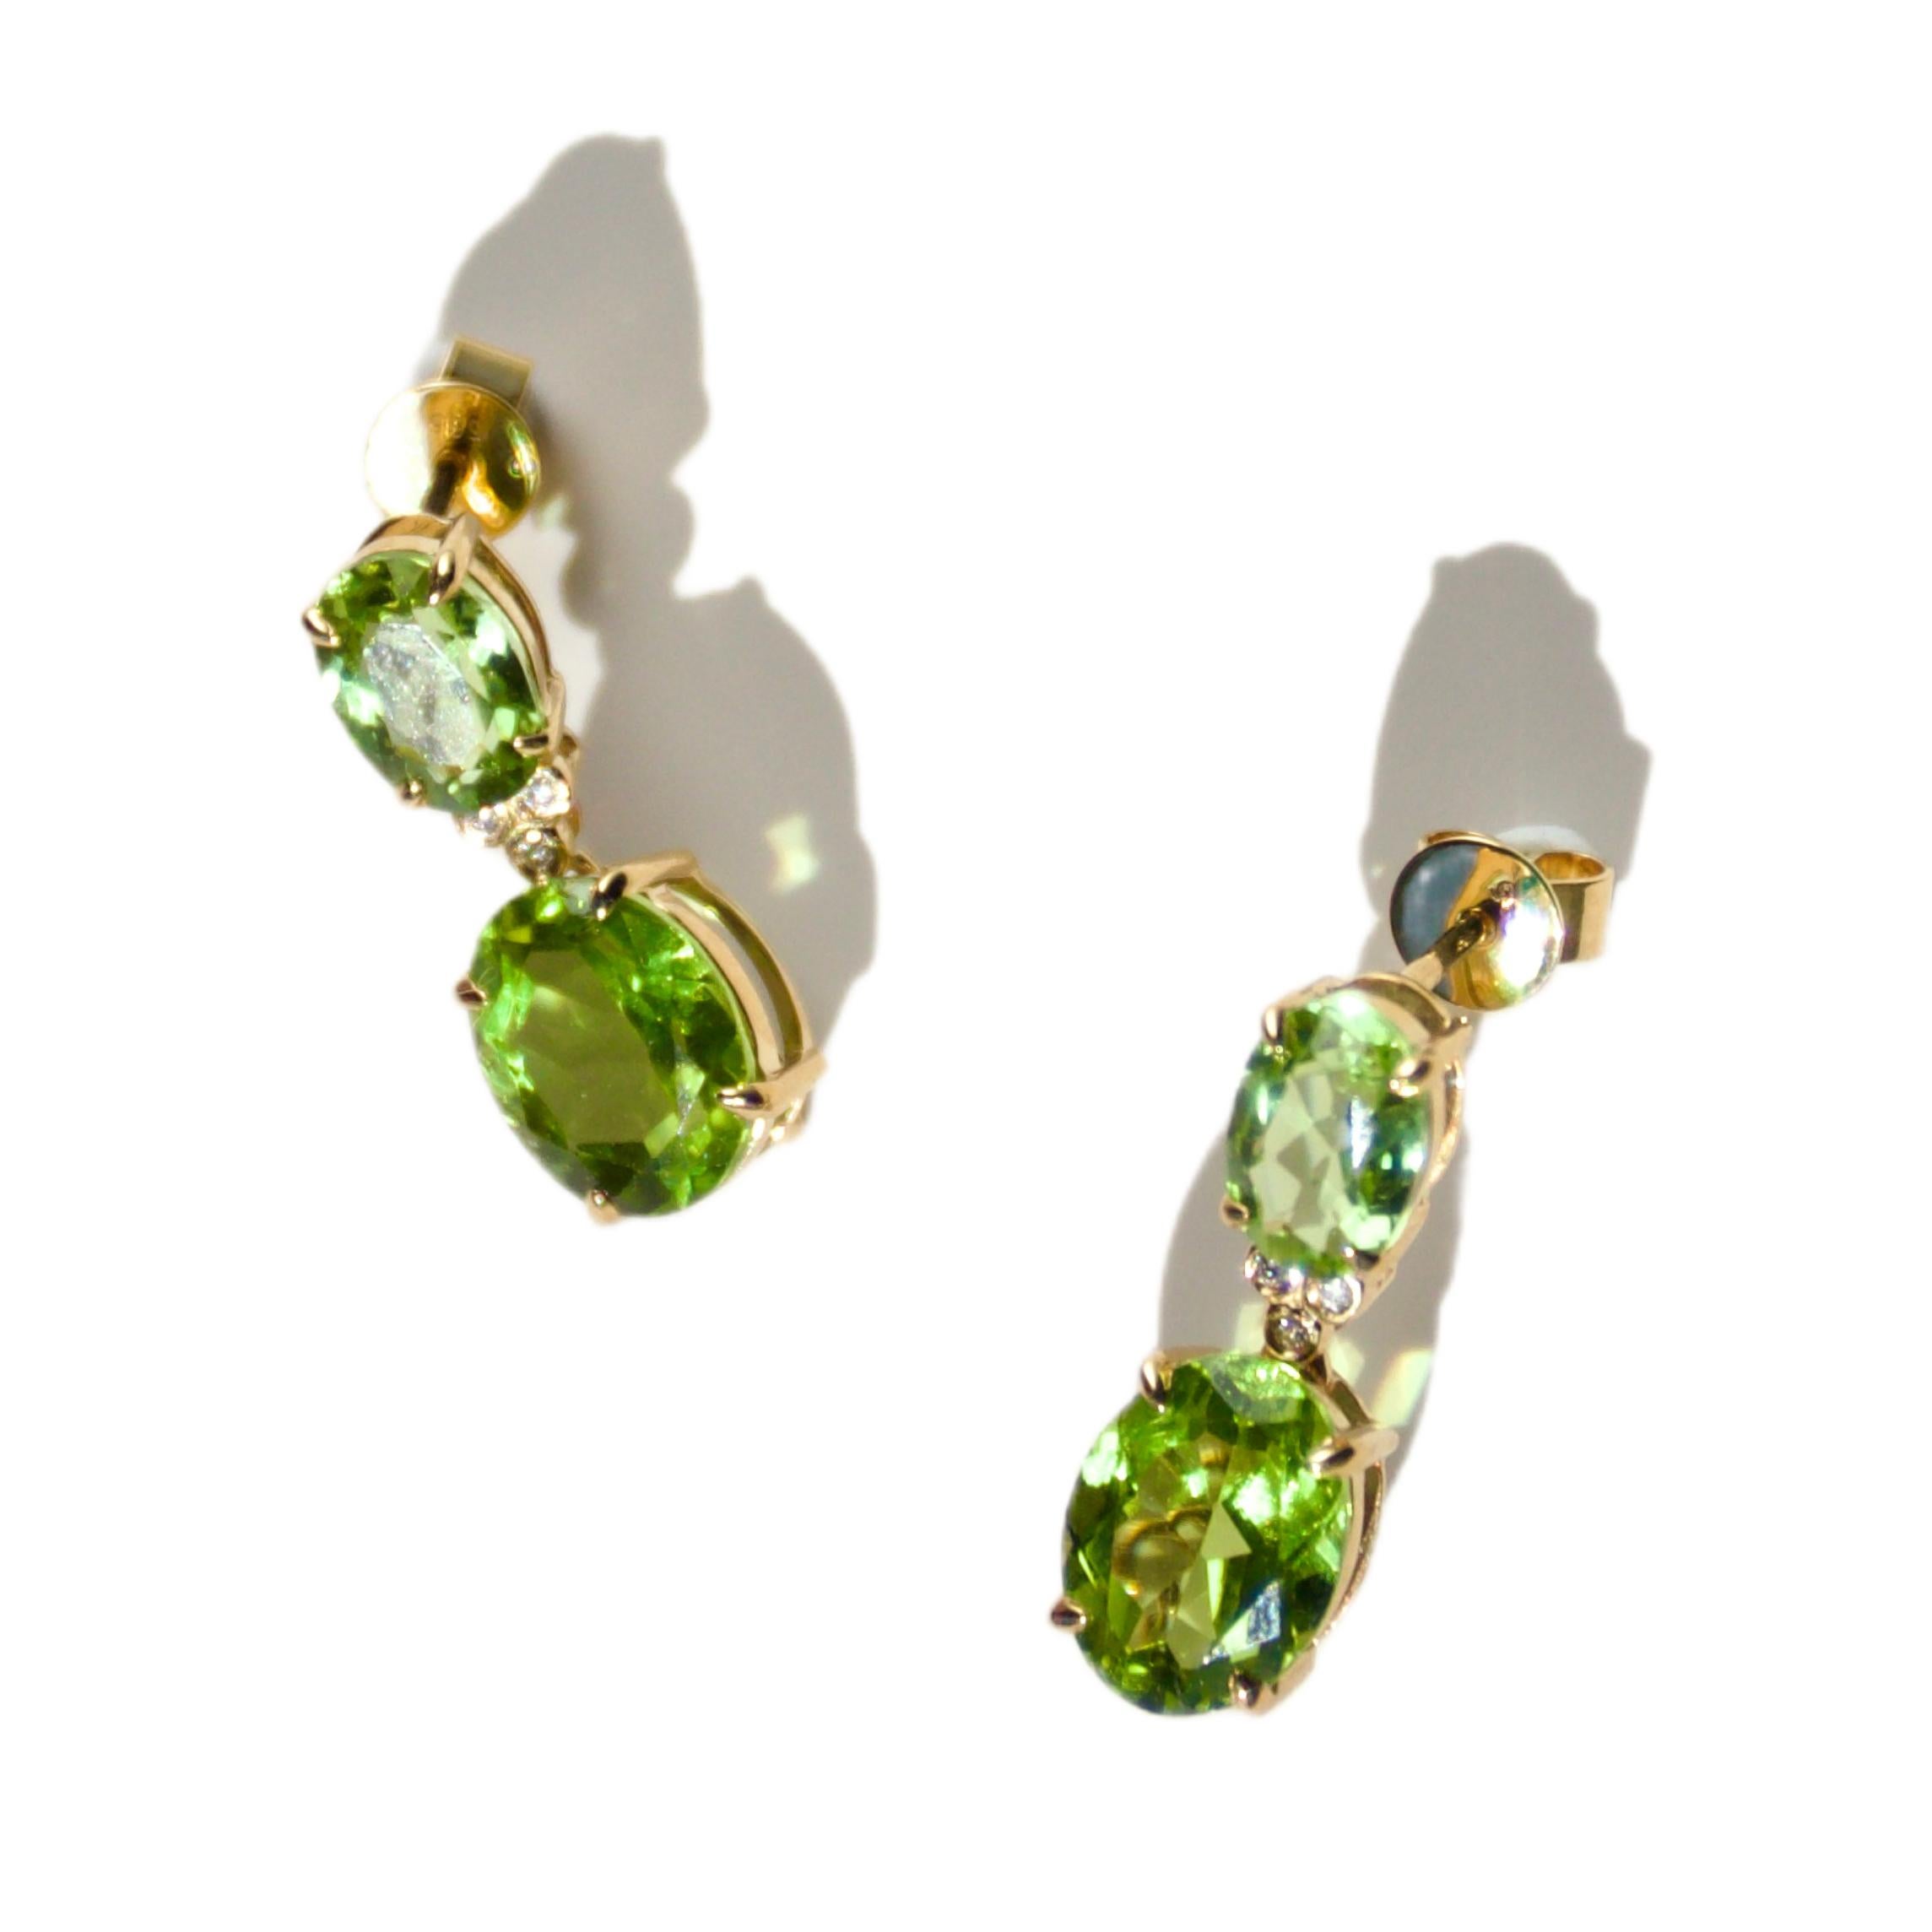 Discover Kai’s 6ct Green Peridot Diamond Baroque Pearl Convertible Drop Earrings in 14k yellow gold. Elevate your style with this luxurious pair of earrings, featuring the finest craftsmanship and attention to detail. The vibrant green peridot